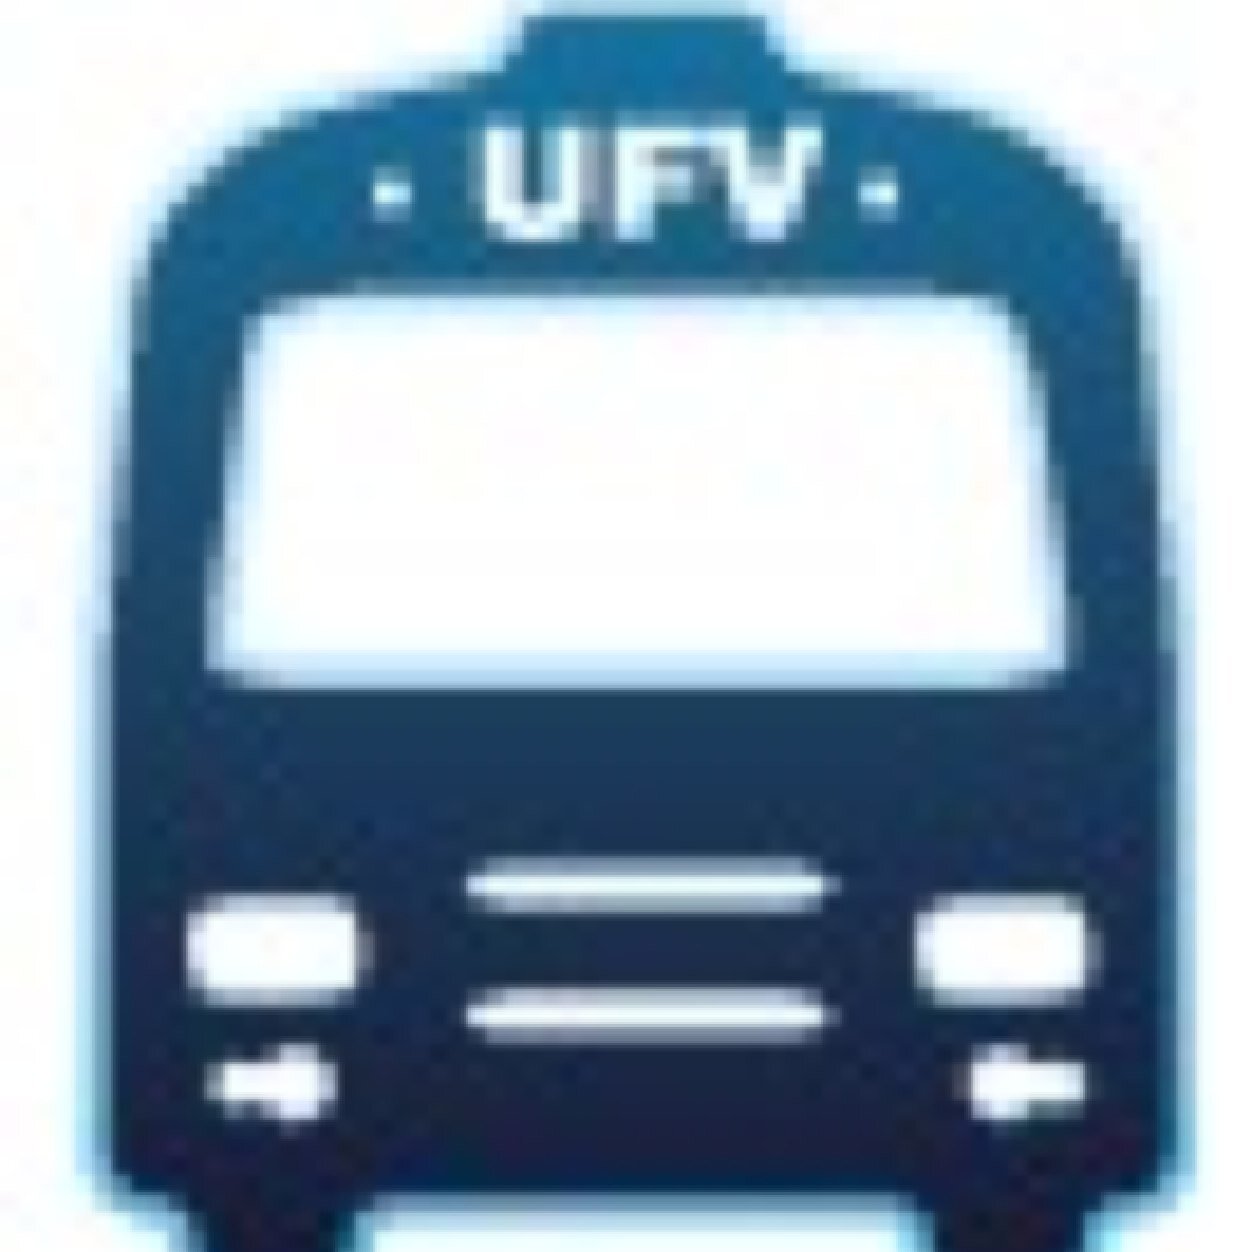 Chilliwack to Abbotsford + Langley to Abbotsford Shuttle Service for UFV students. Funded by @UFVSUS and @GOUFV. Follow for service updates and Tweet questions.